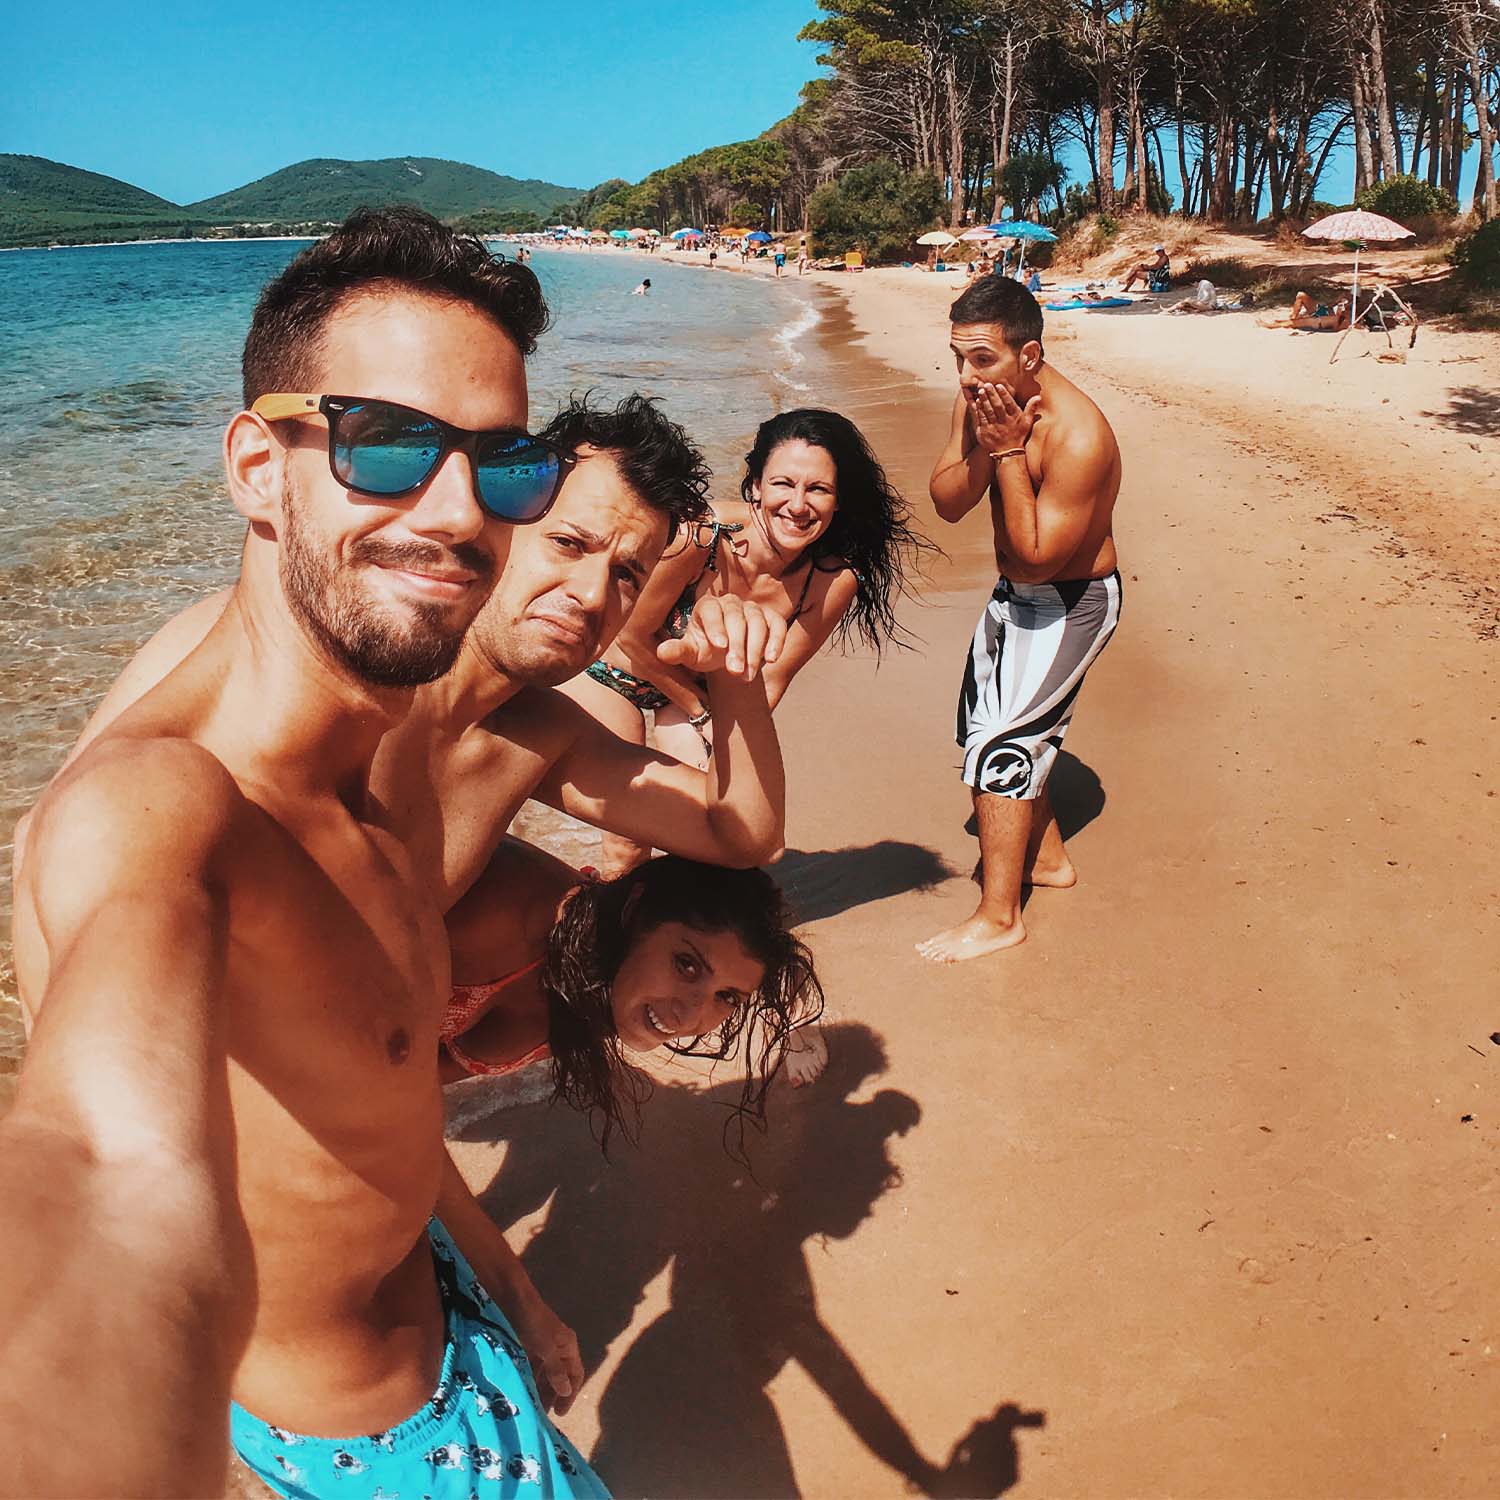 A group of friends take photos on the beach to record unforgettable moments